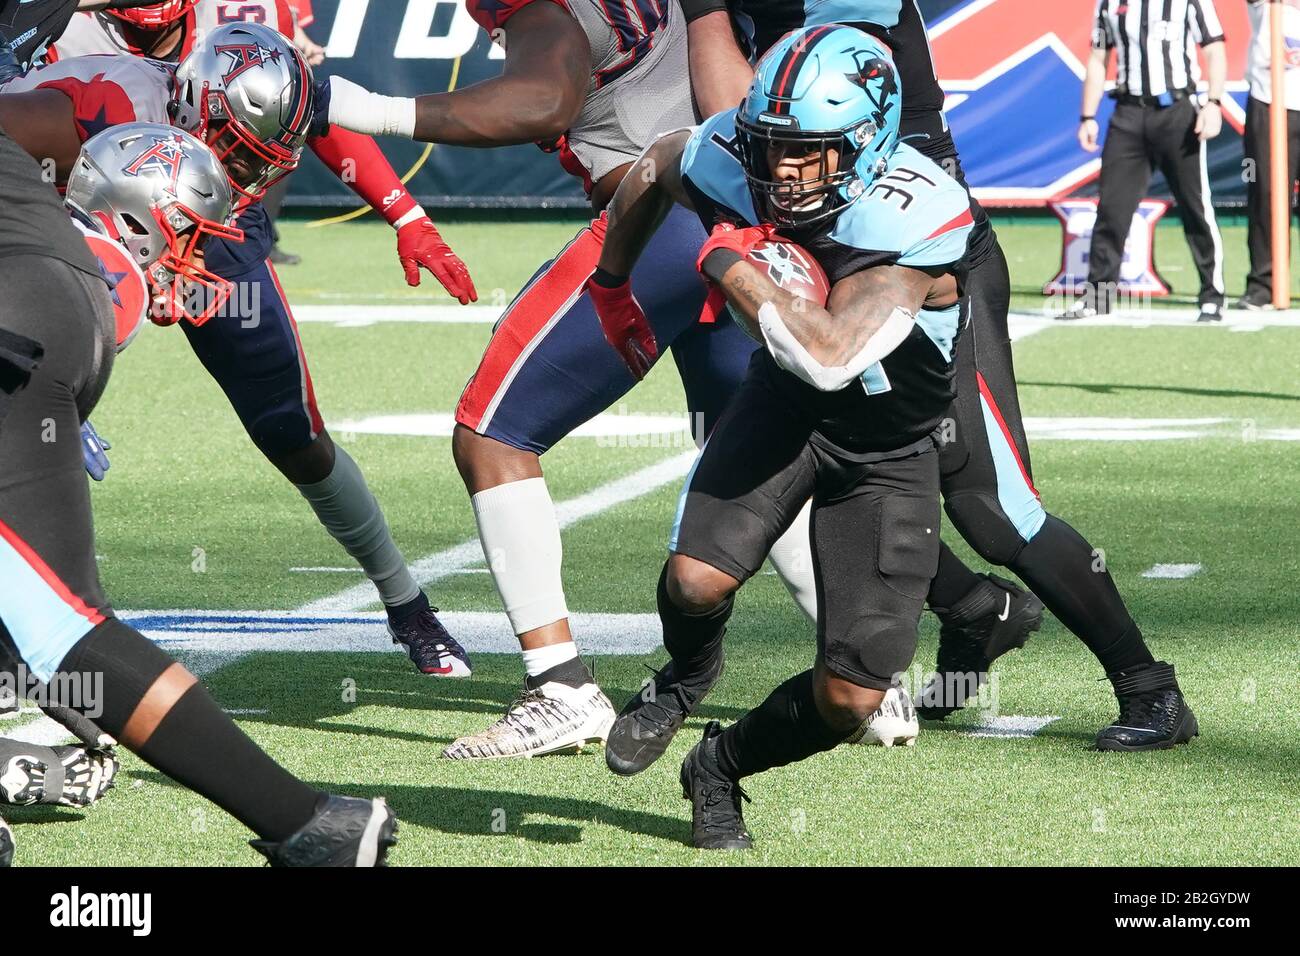 Dallas Renegades running back Cameron Artis-Payne (34)finds running room during an XFL football game, Sunday, Mar. 1, 2020, in Arlington, Texas, USA. (Photo by IOS/ESPA-Images) Stock Photo